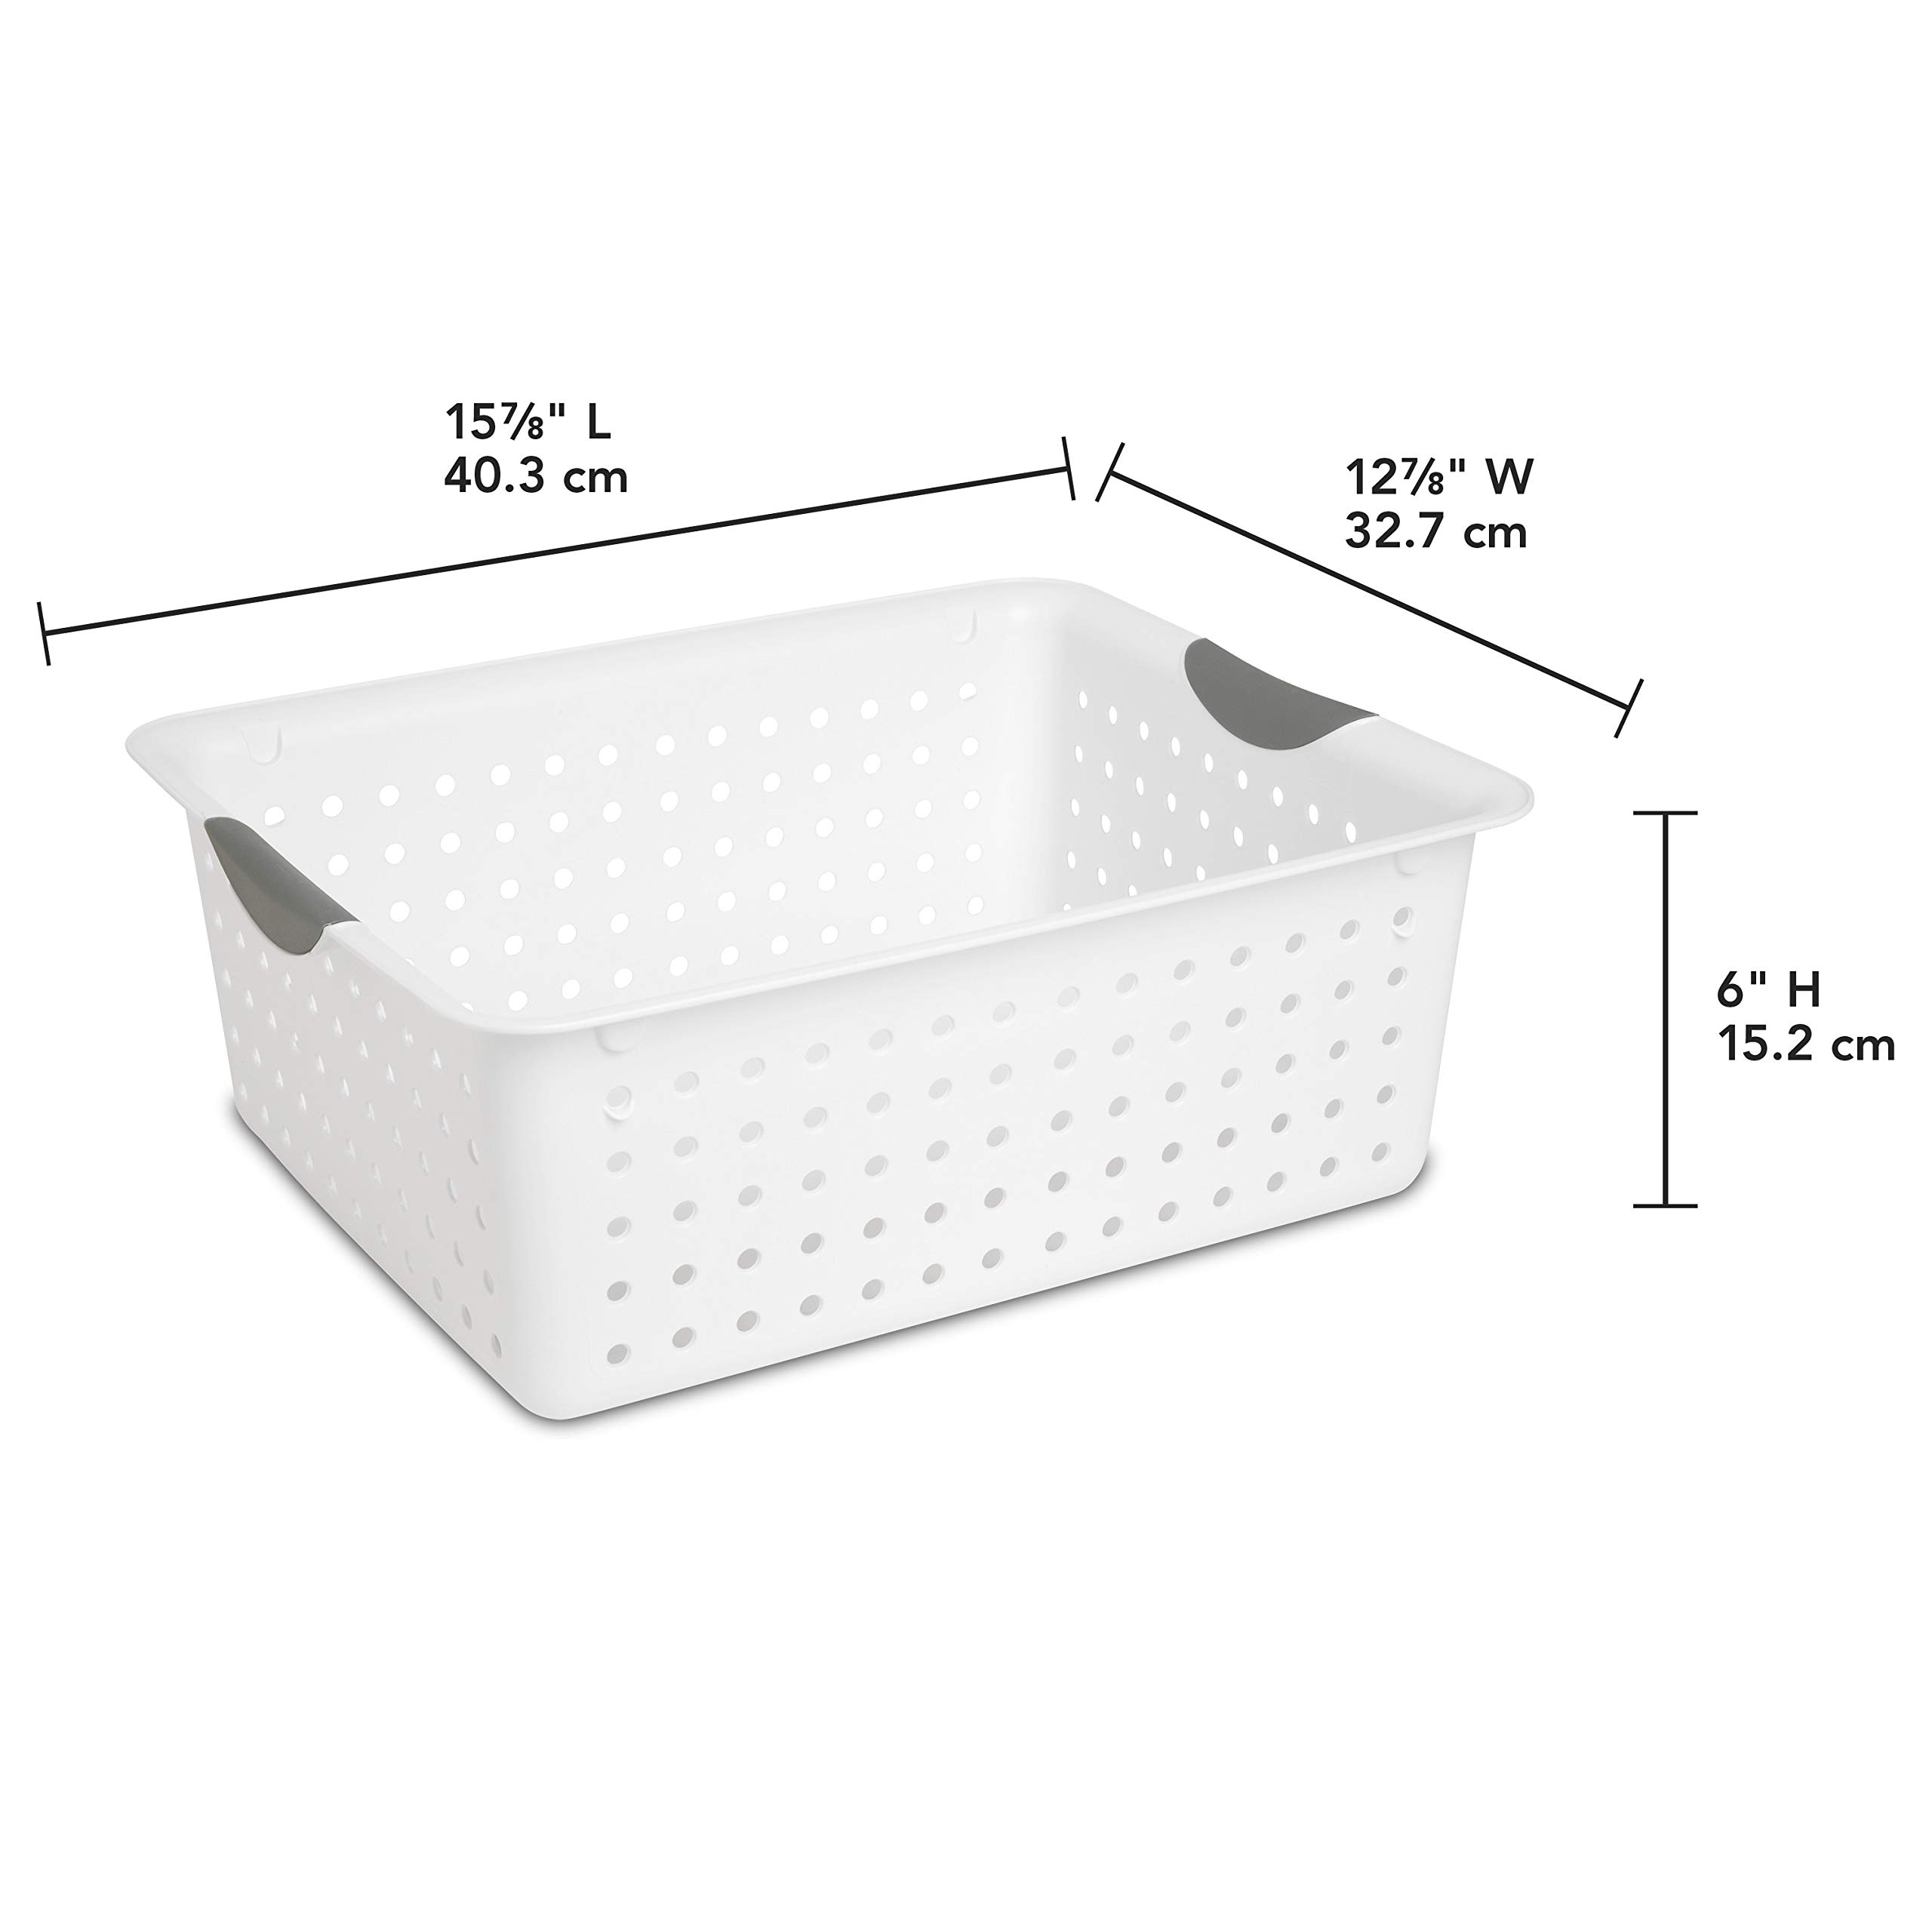 Sterilite Large Ultra Basket, Storage Bin to Organize Closets, Cabinets, Pantry, Shelving and Countertop Space, White, (Pack of 6)